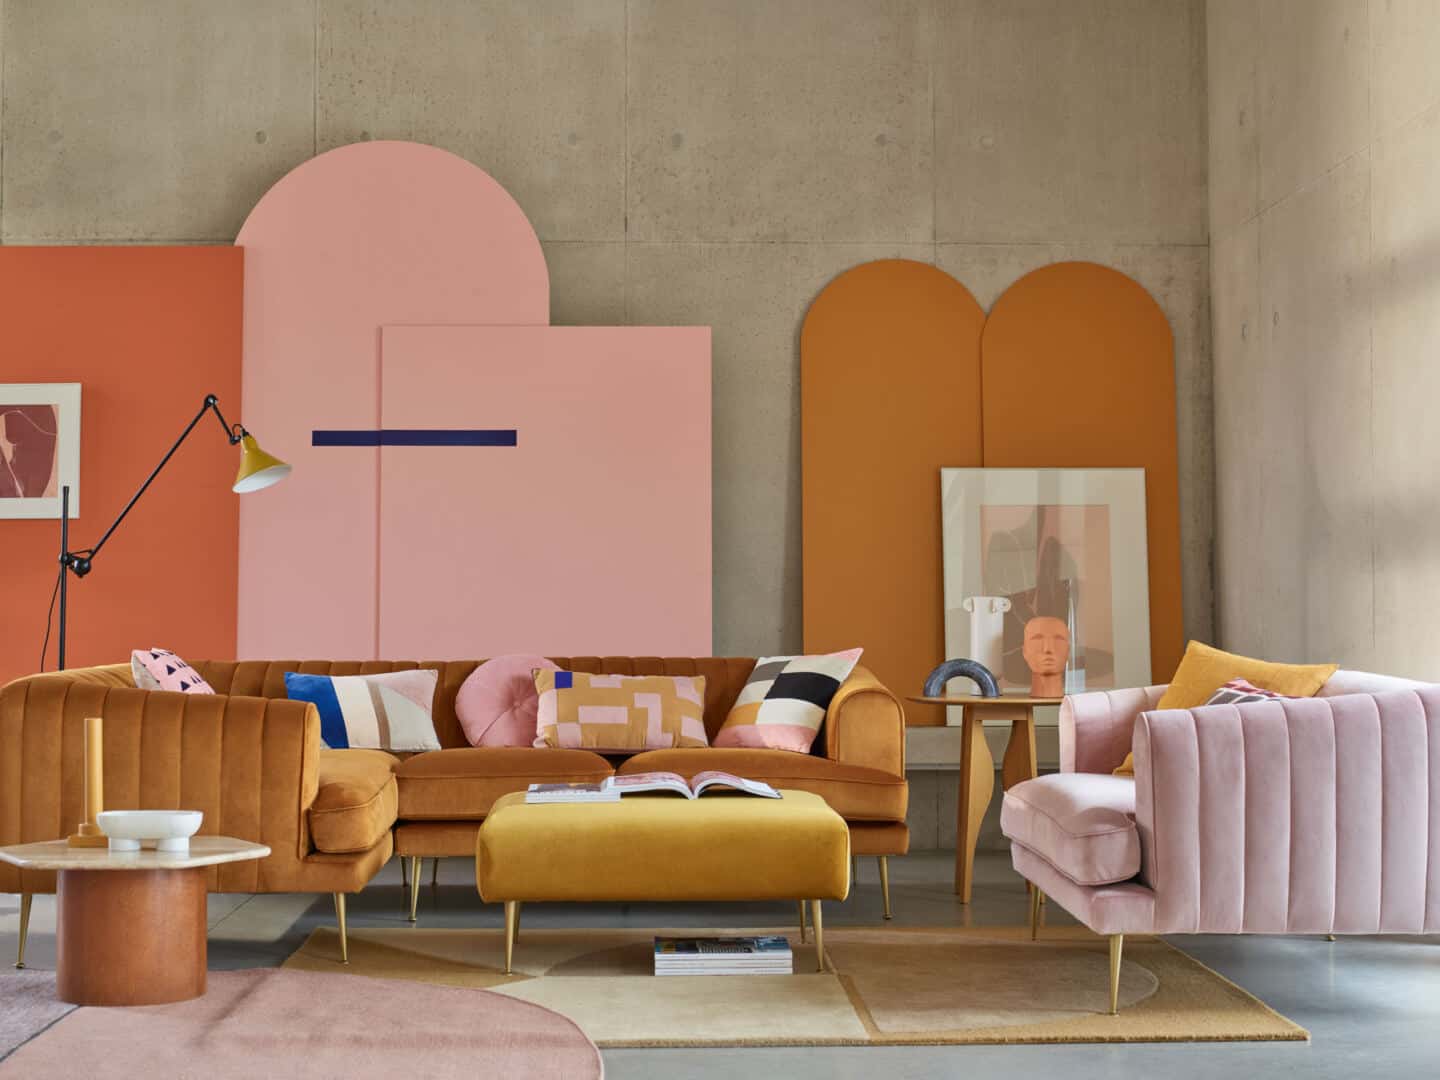 Autumnal Hues in interiors - Living room setup featuring a cinnamon velvet corner sofa from DFS, a pink chait and a mustard yellow foot stool.